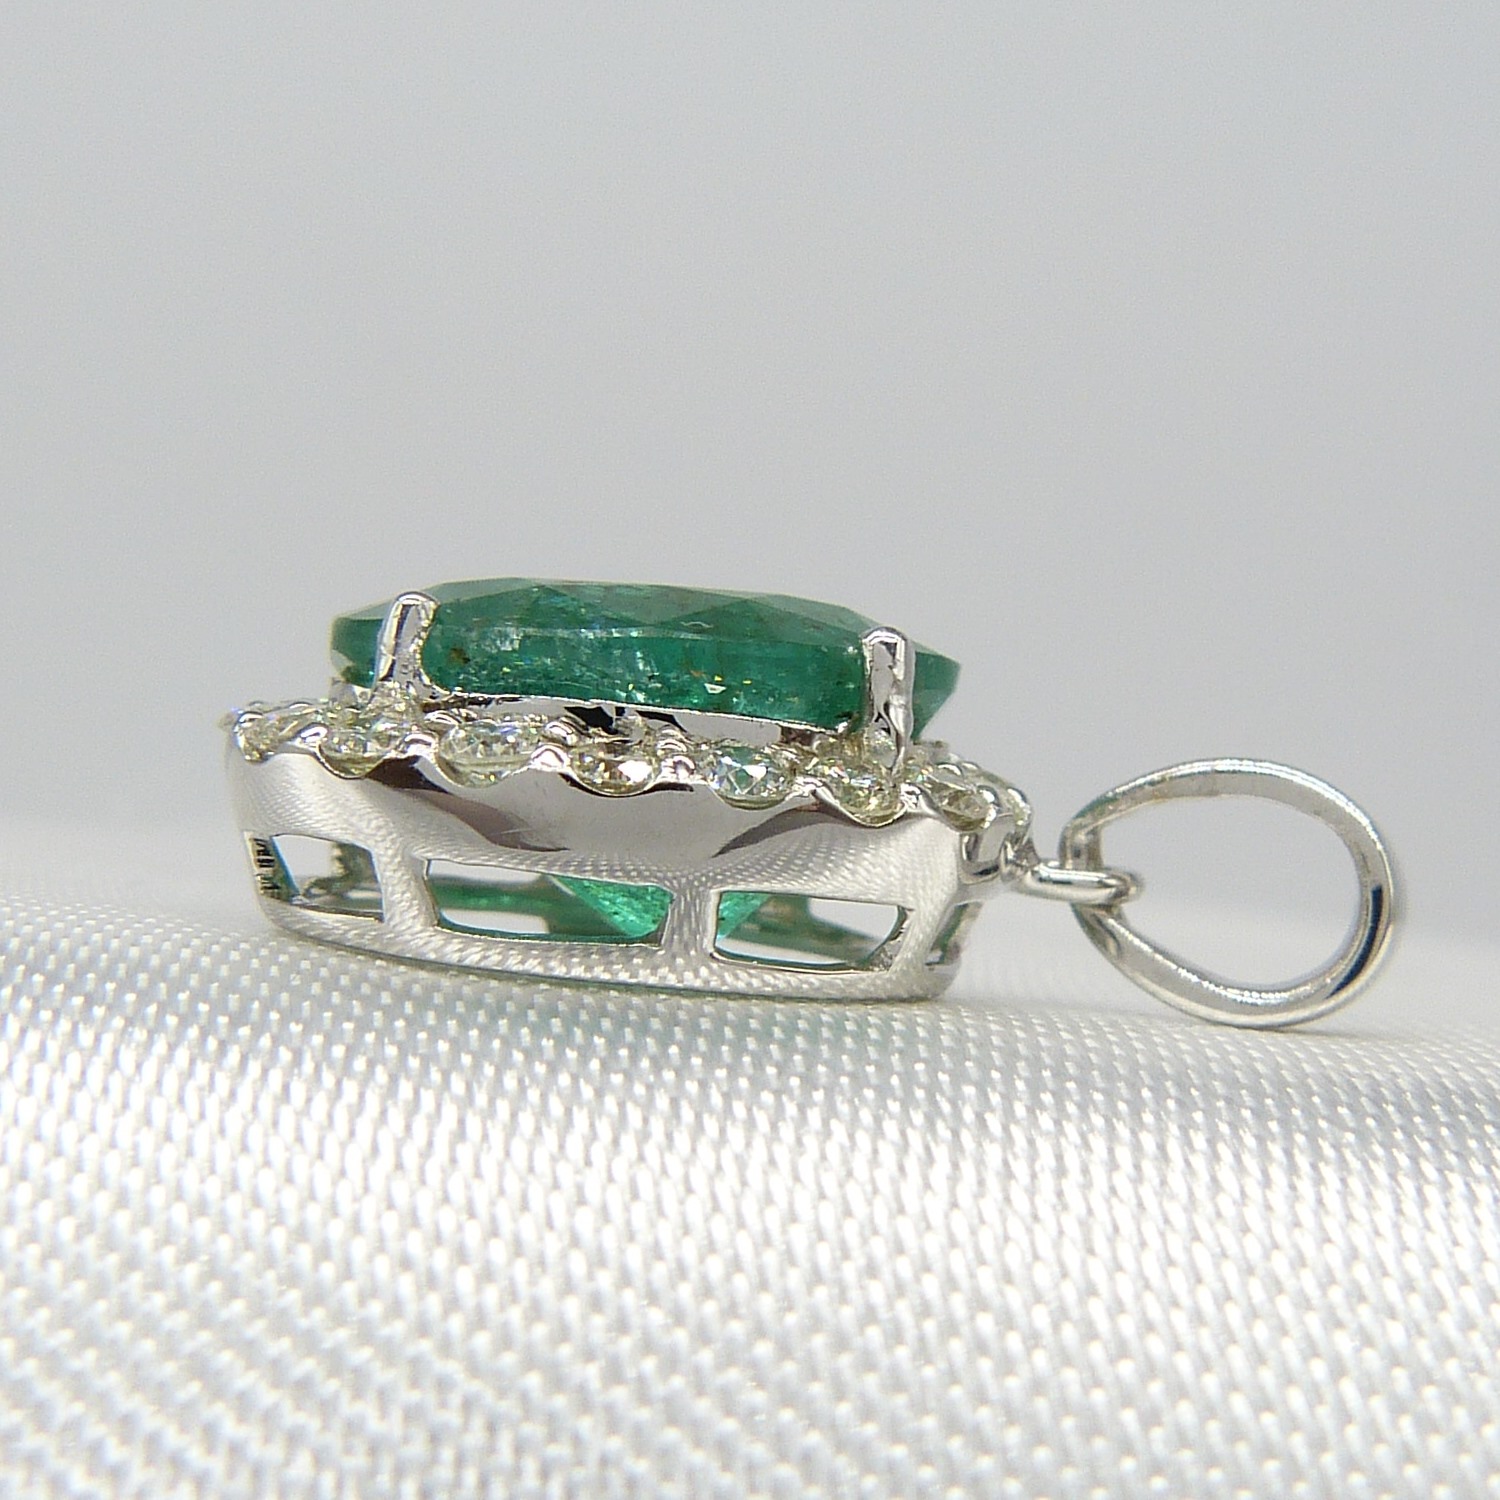 A large emerald and diamond halo pendant in 18ct white gold - Image 7 of 7